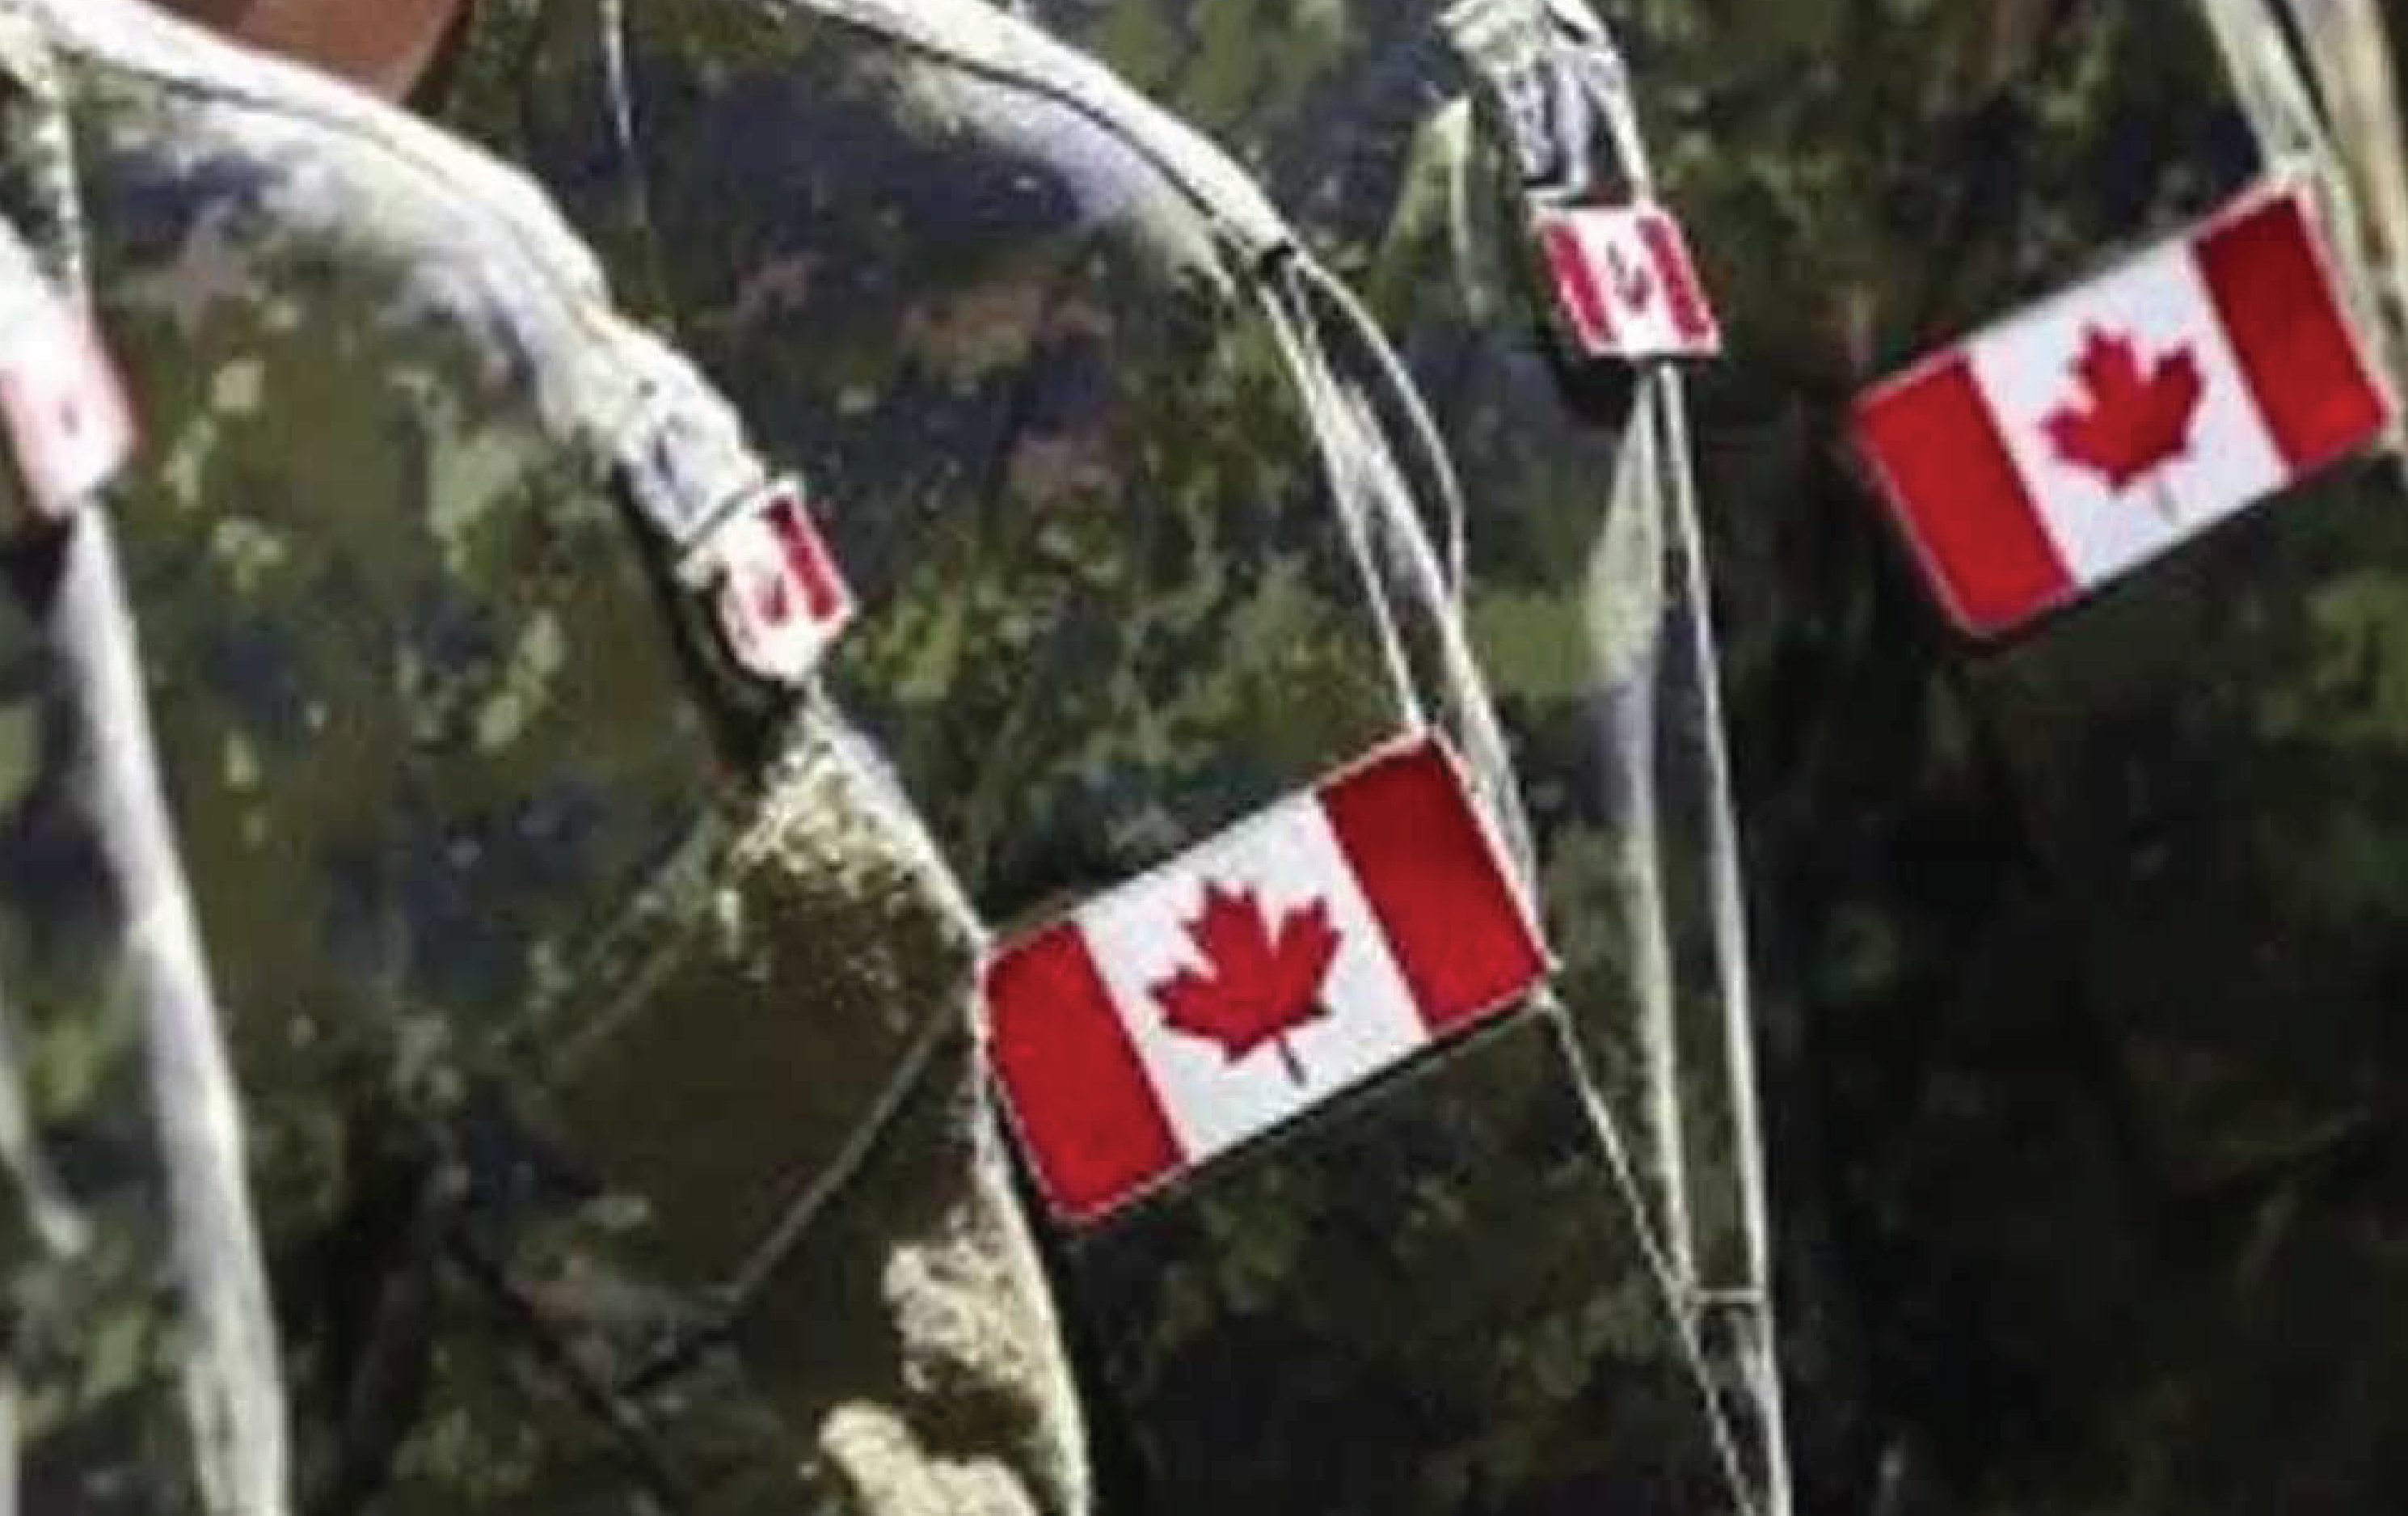 Permanent residents can now be part of Canadian military Indians likely to benefit